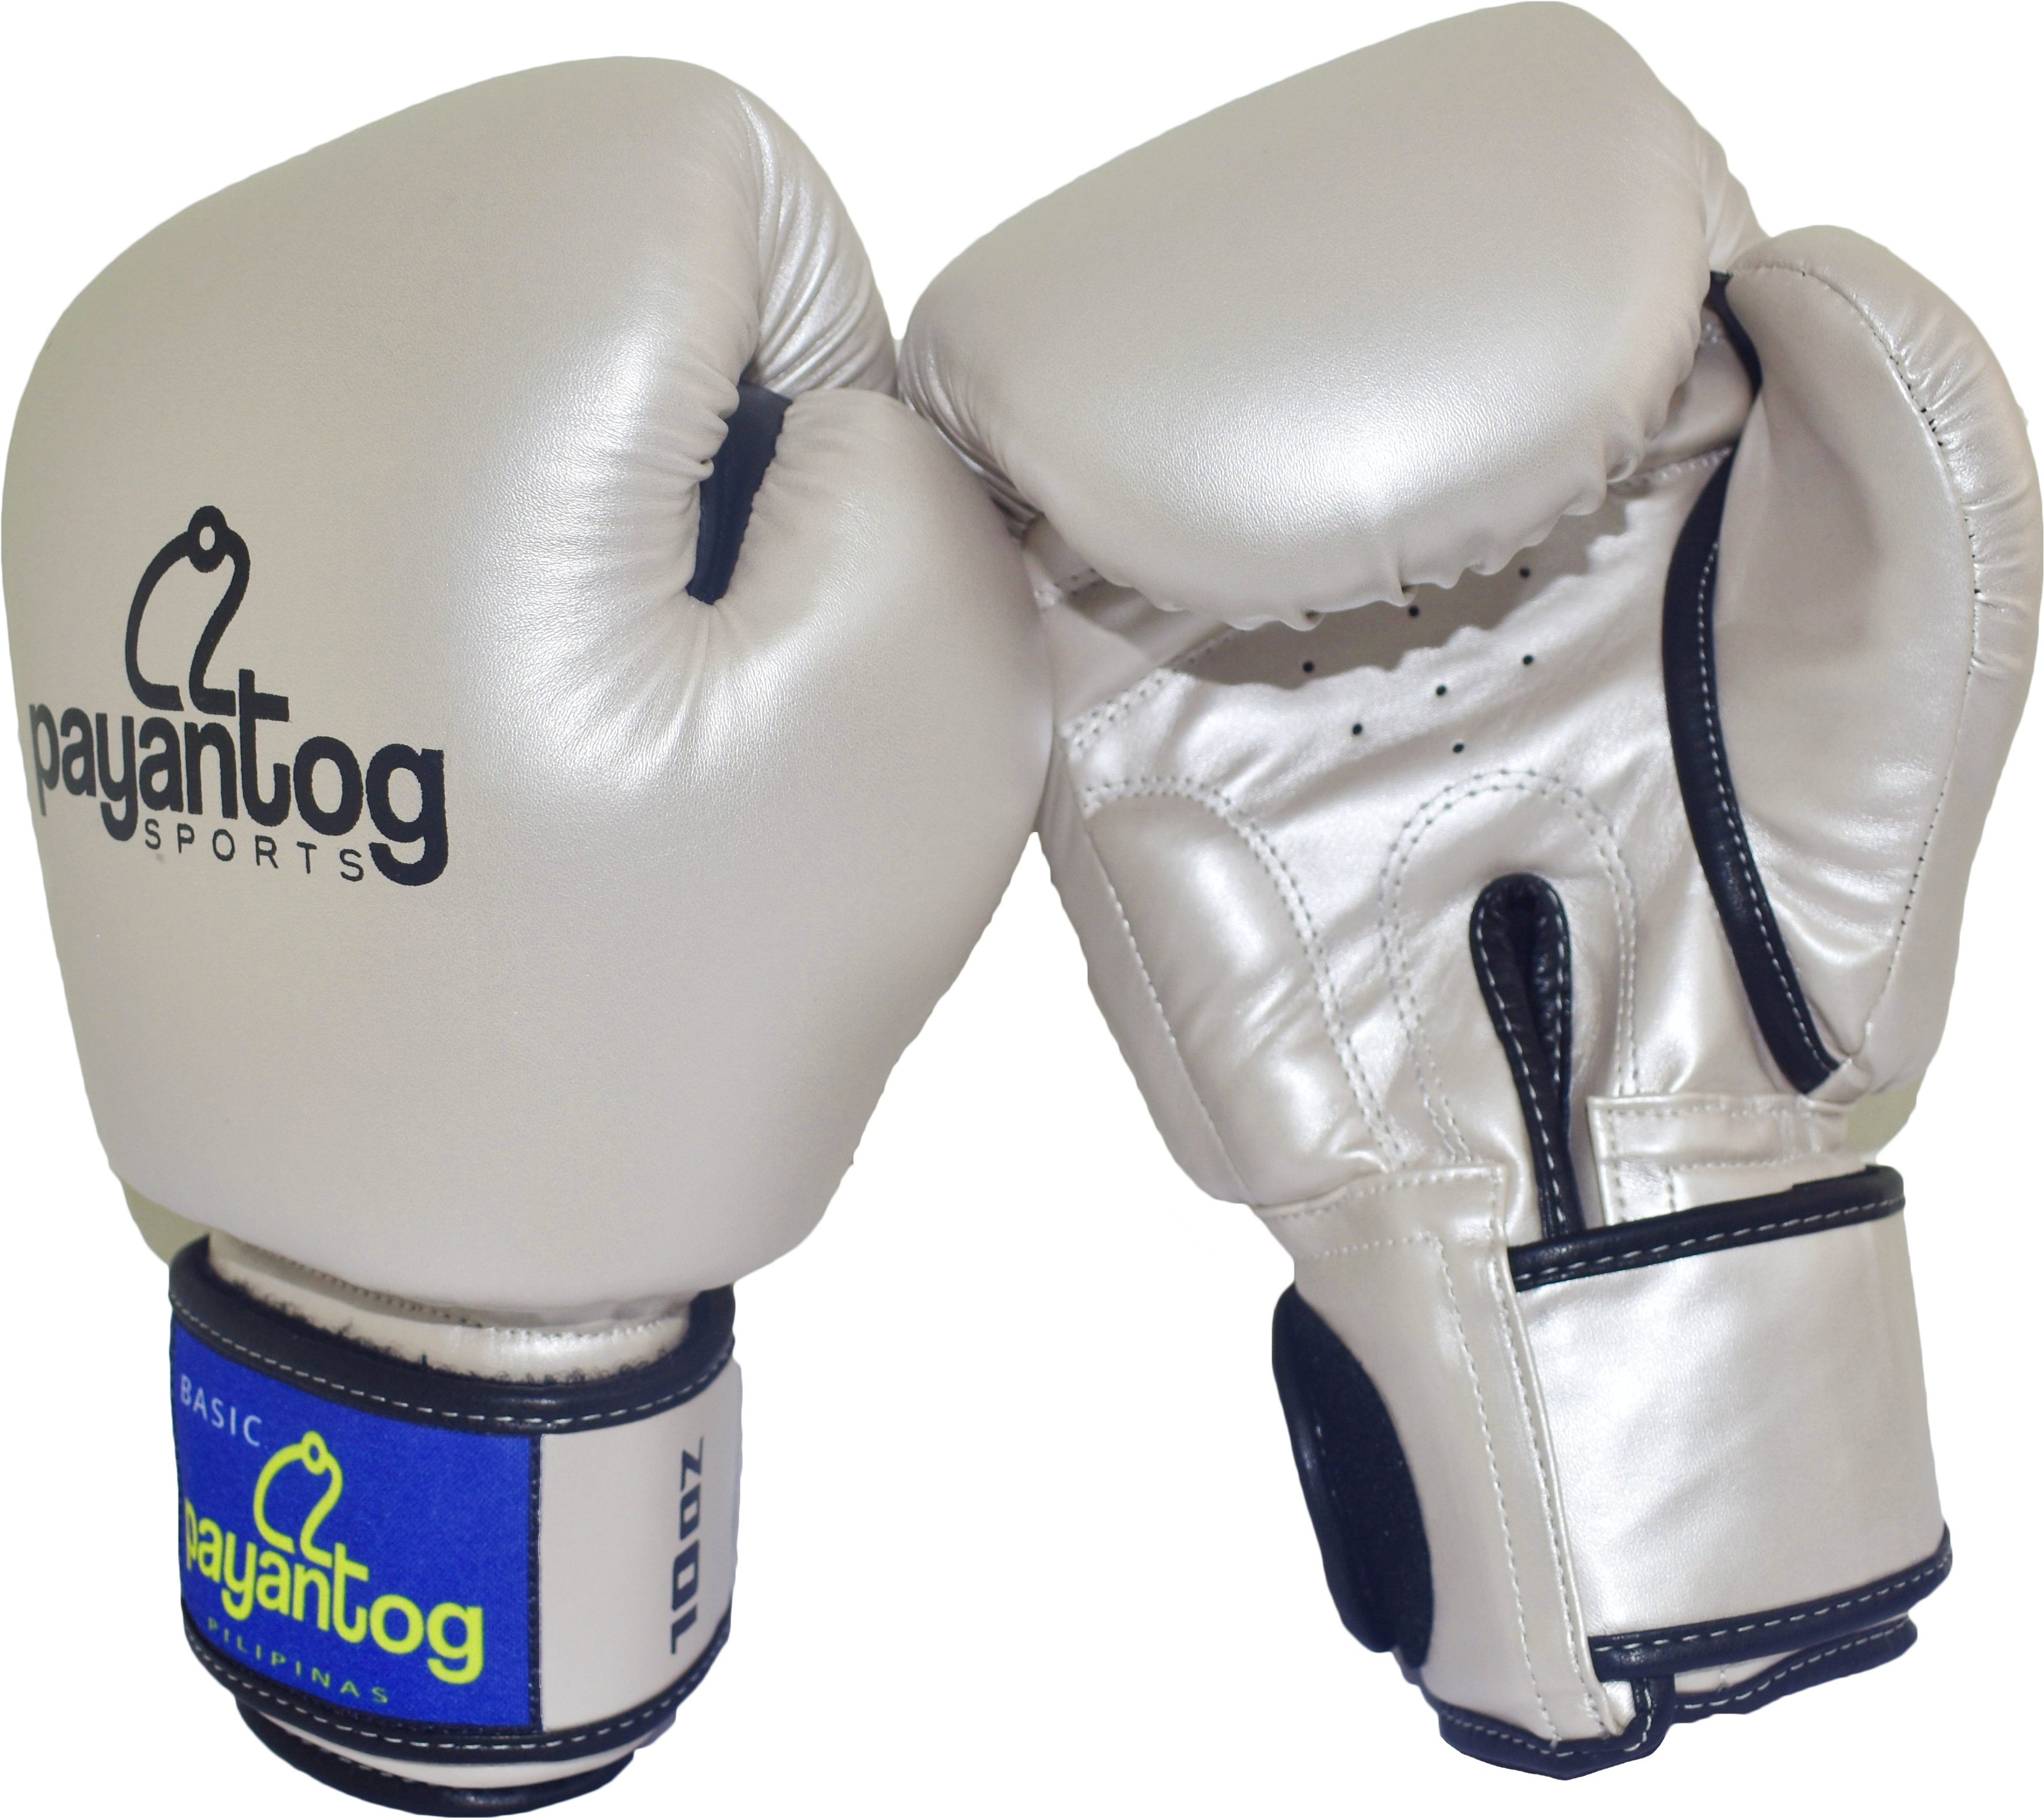 Silver Boxing Gloves Payantog Sports PNG image